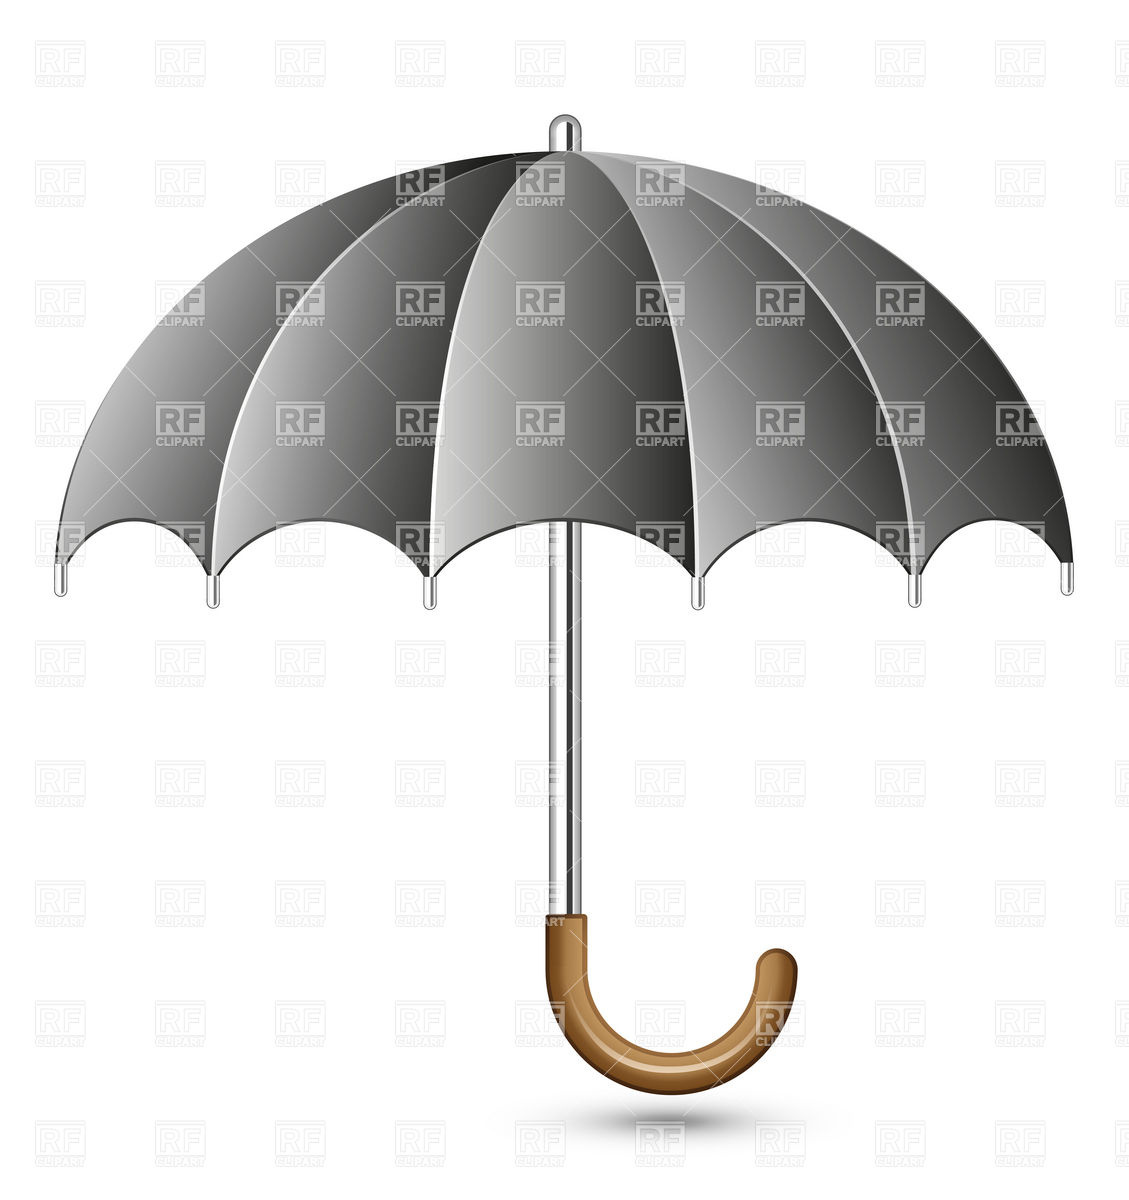 Clipart Catalog   Objects   Black Umbrella Download Royalty Free